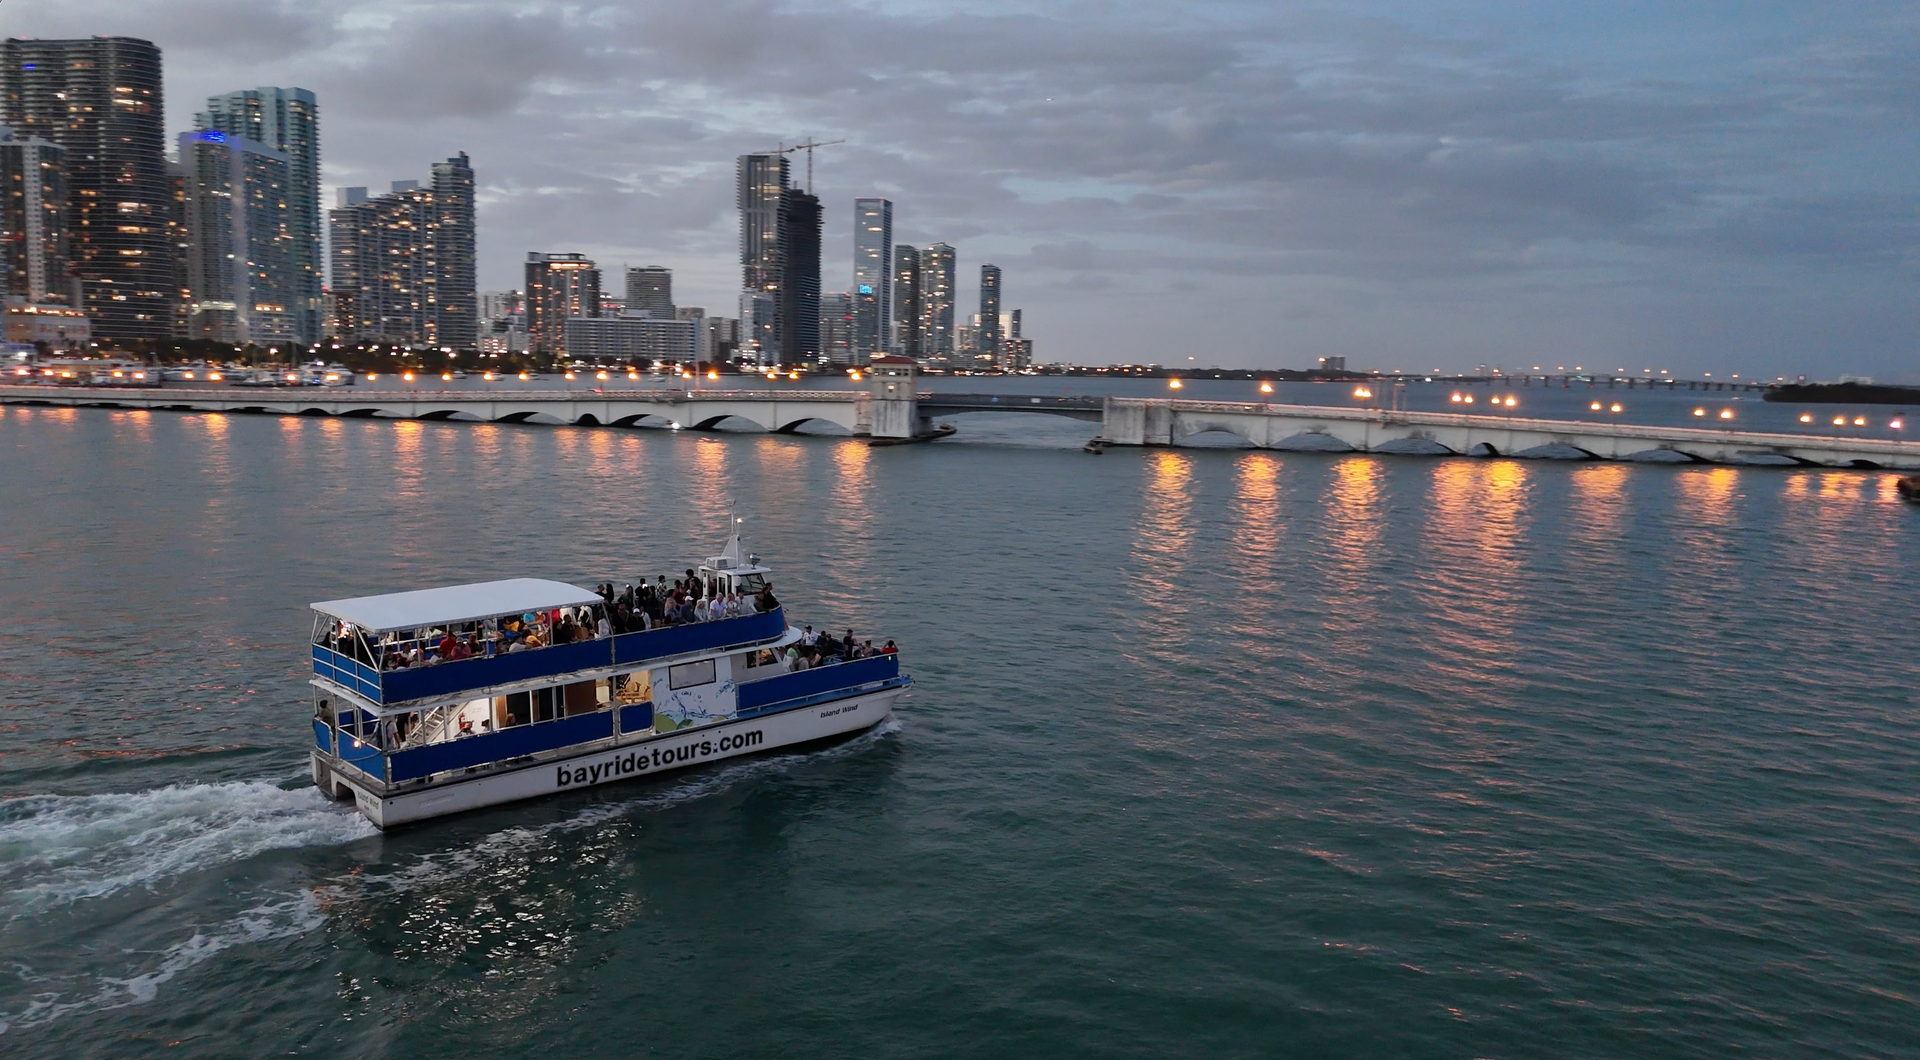 The Venetian Causeway is the oldest bridge in Miami. Movies like the 2 Fast  and furious, were filmed on this bridge. The Venetian Causeway is the only way into the Venetian Islands. Of course we get to enjoy the Venetian Islands  from our Miami Sunset Cruise.